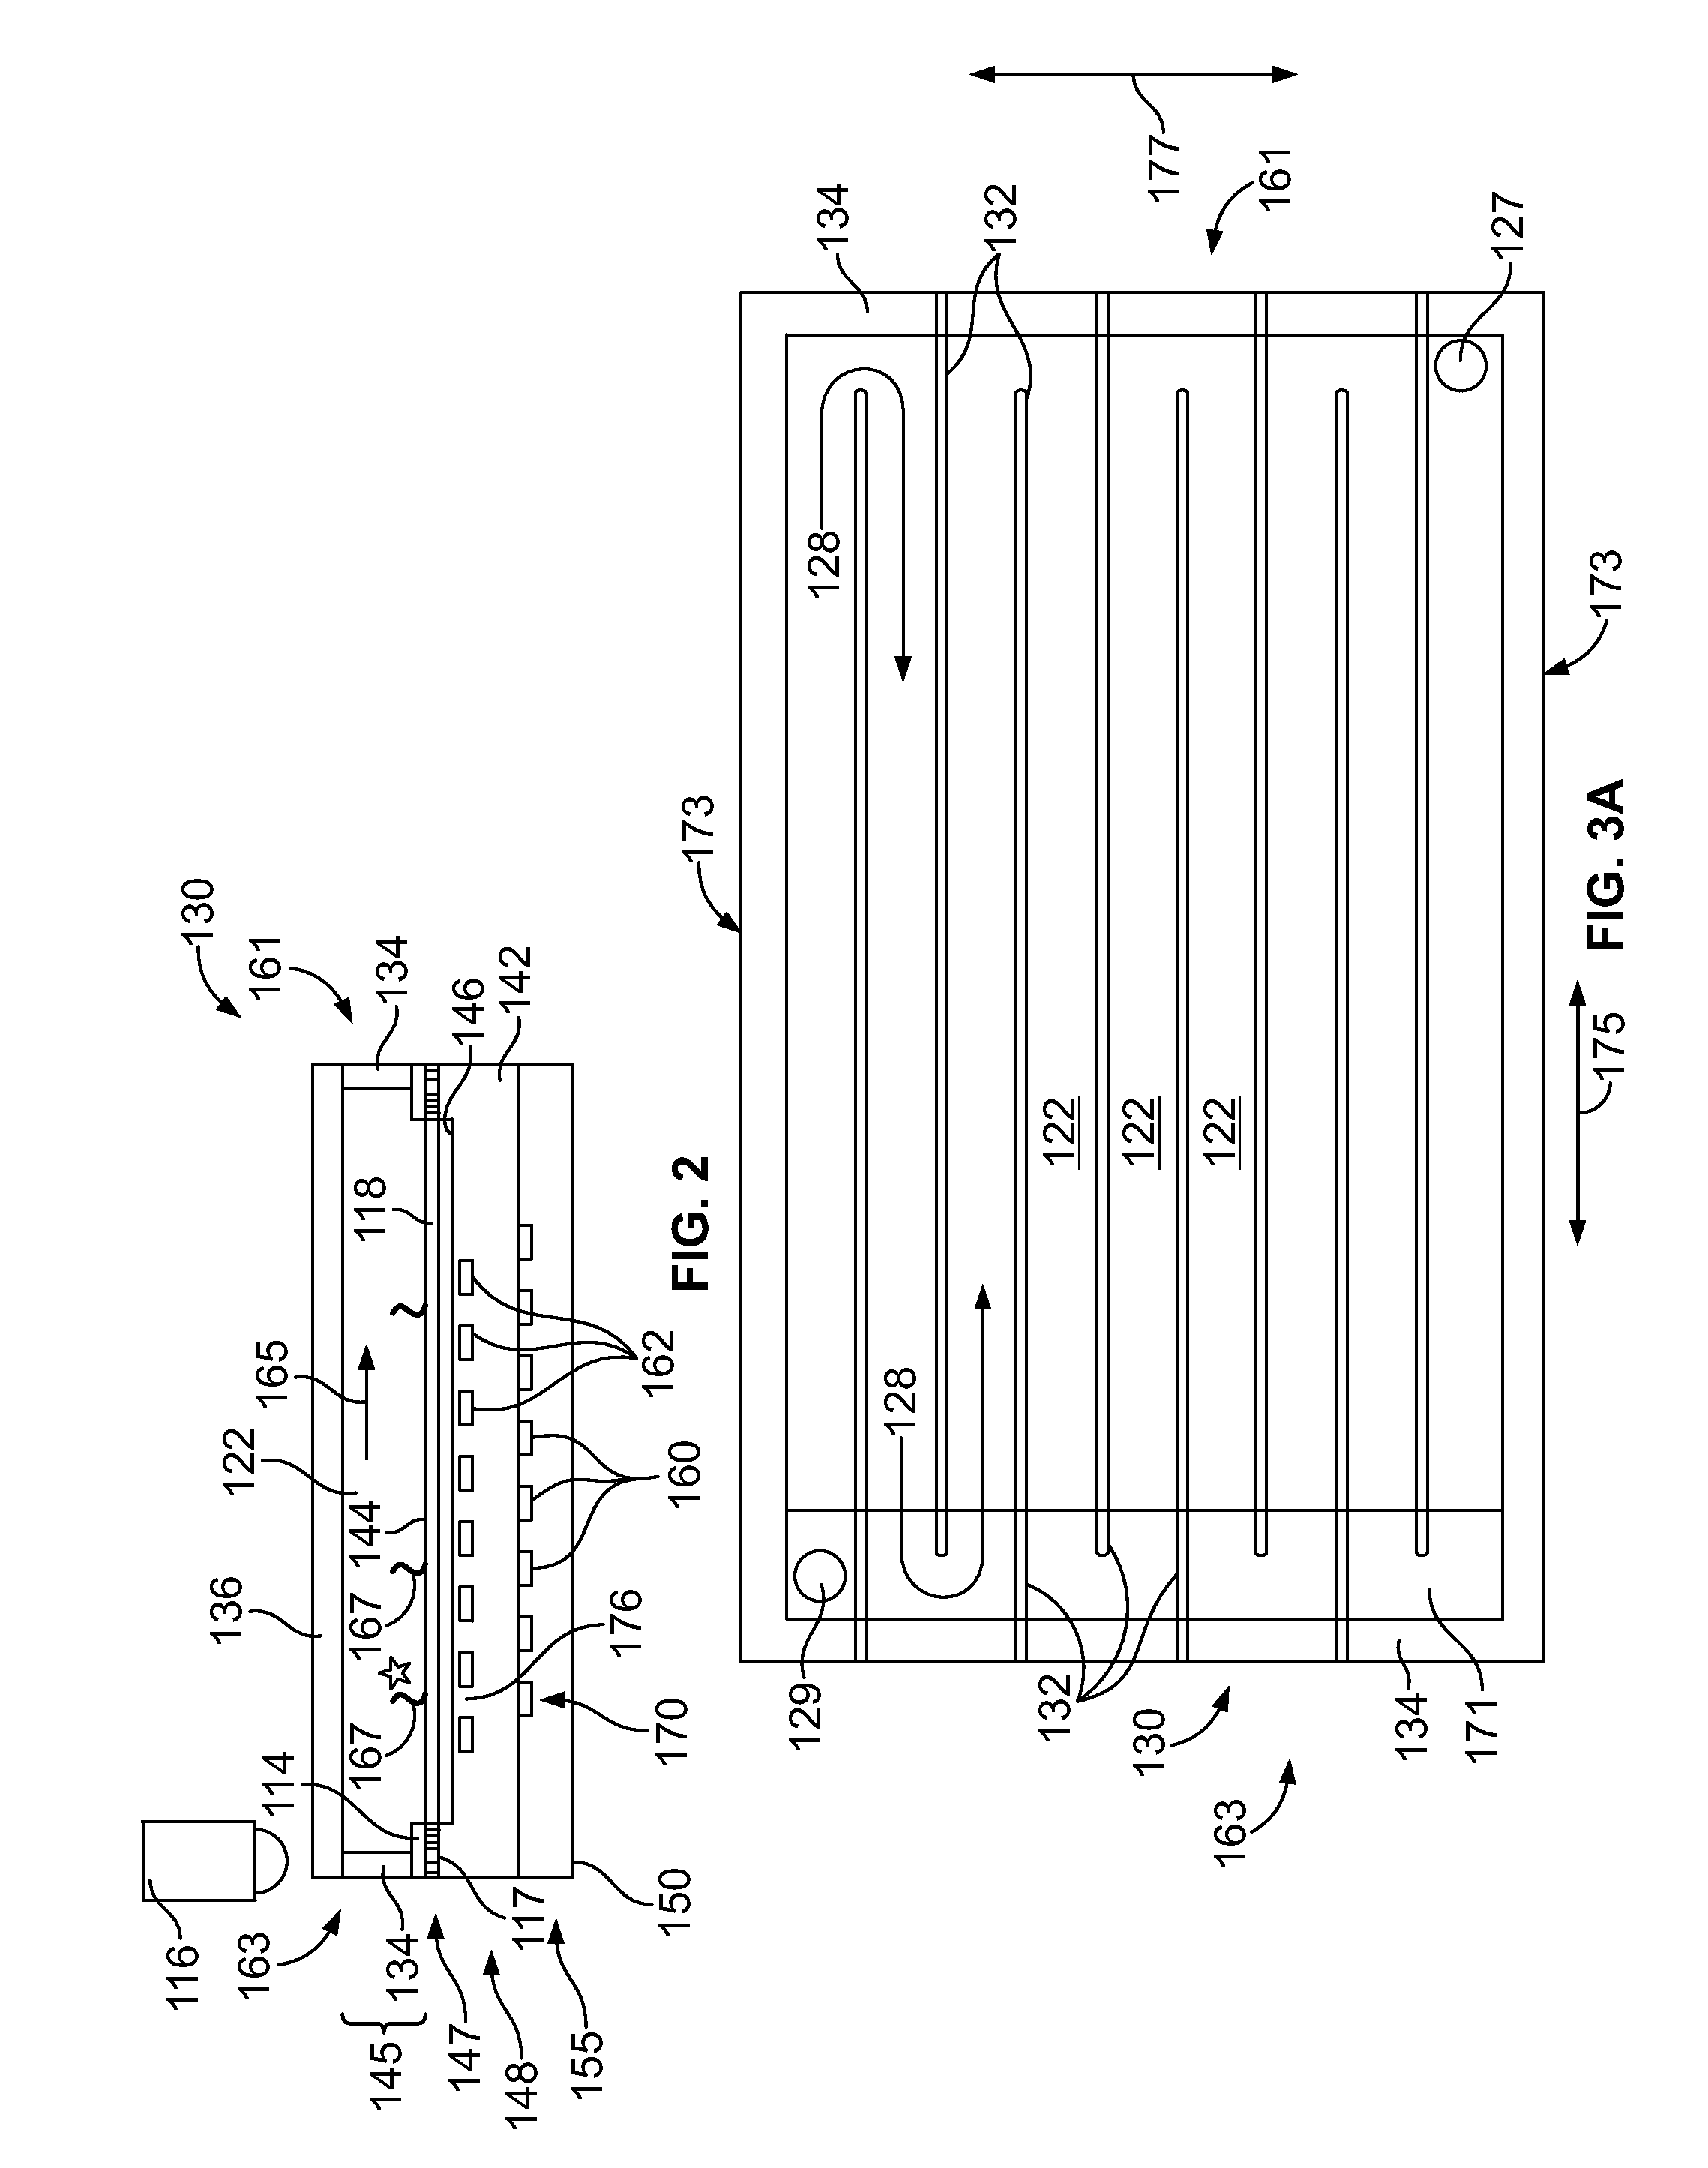 Method and system for fluorescence lifetime based sequencing